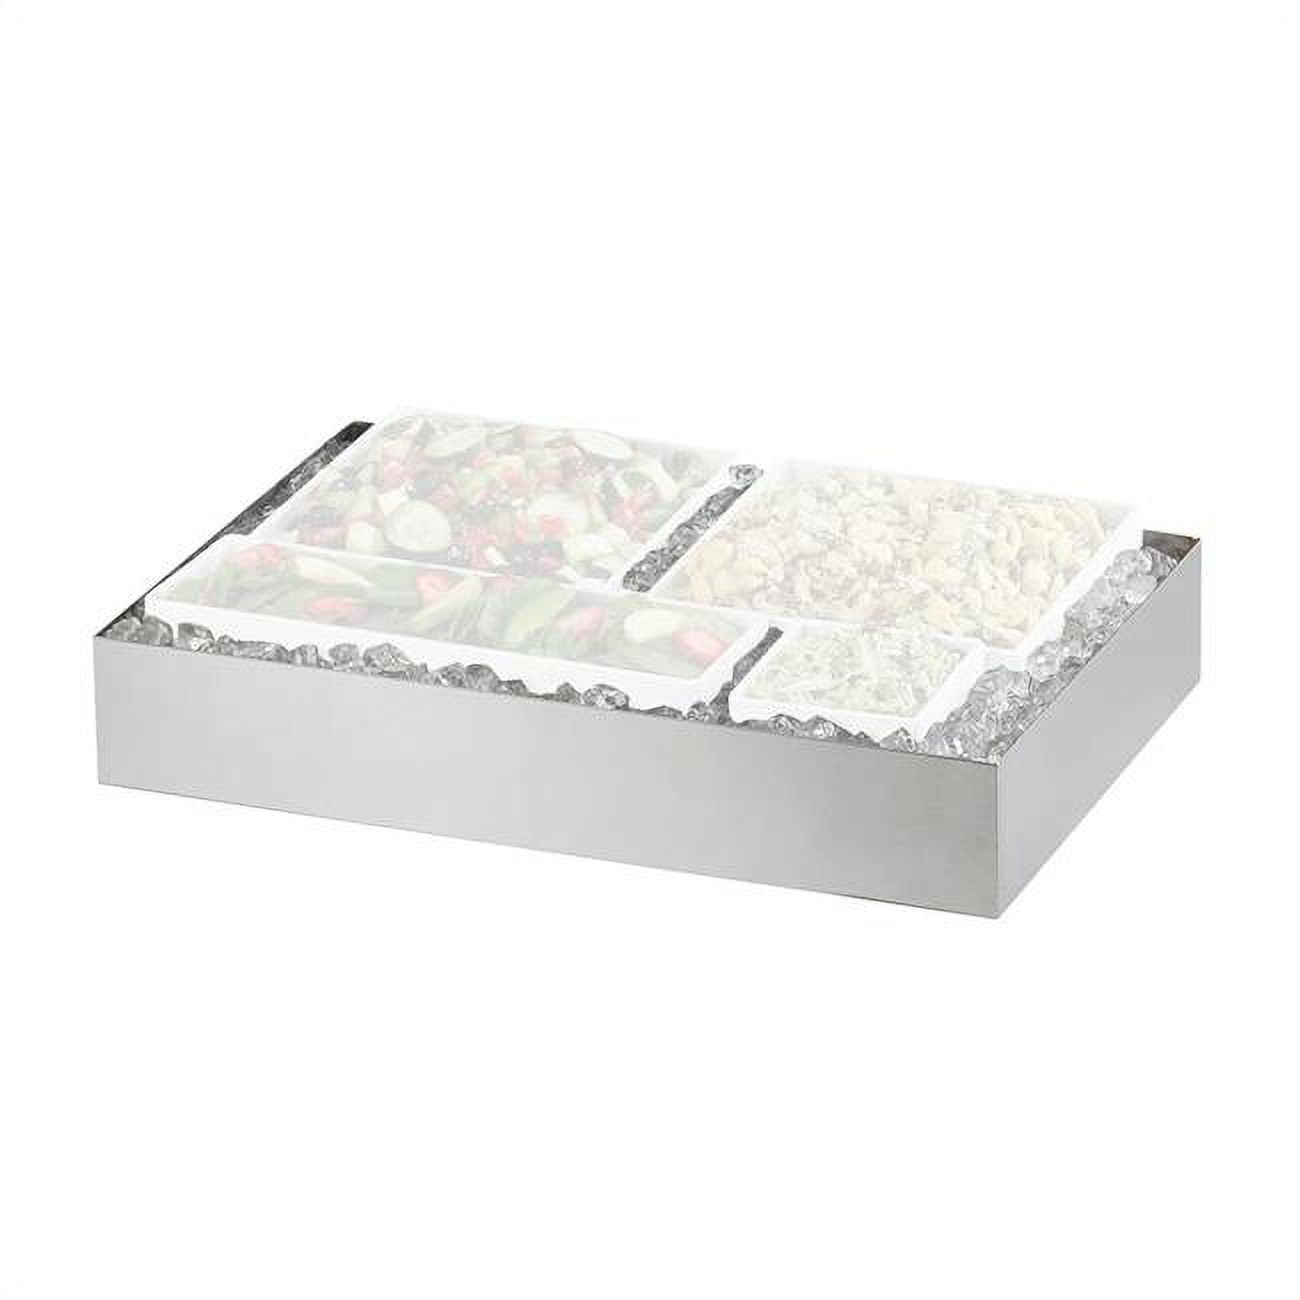 Picture of Cal Mil 1399-55 Cater Choice System Stainless Steel Ice Housing - 16 x 24 x 4.25 in.